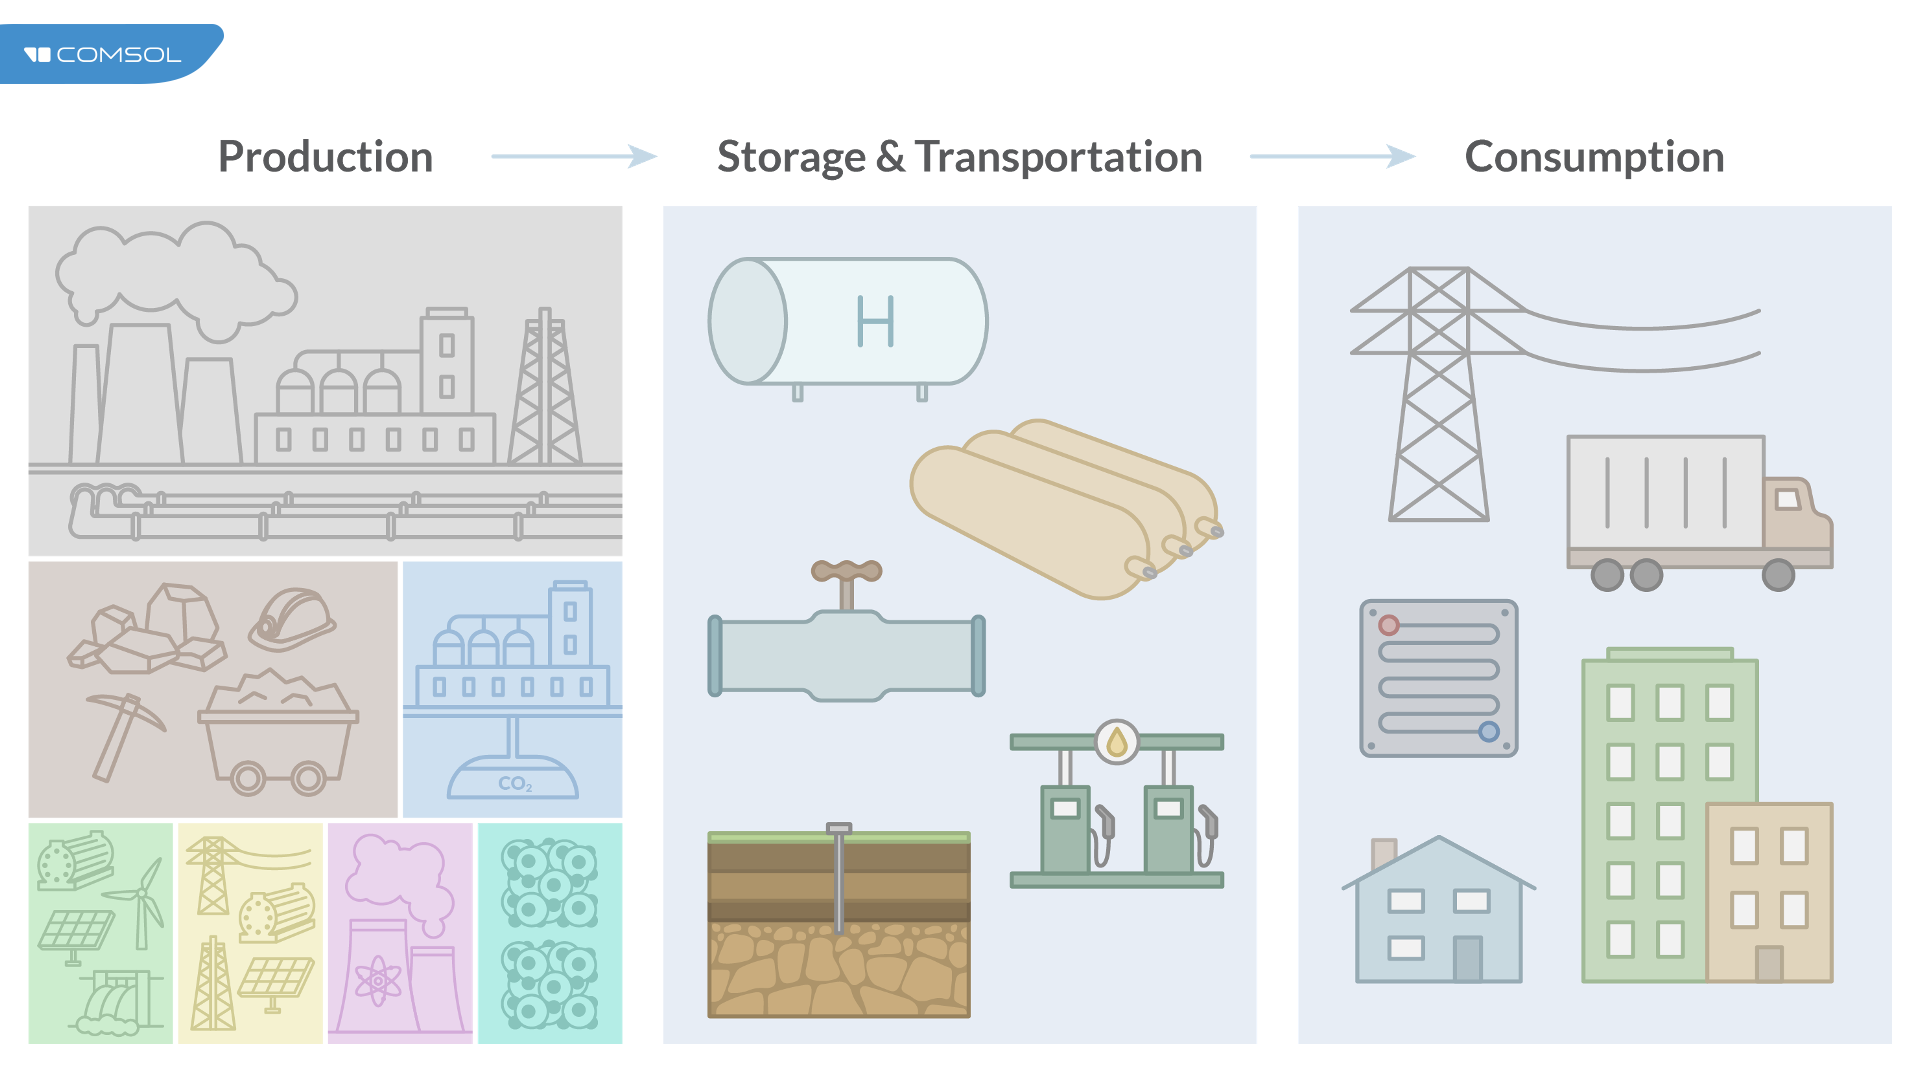 A slide of the hydrogen value chain, including production, storage & transportation, and consumption.